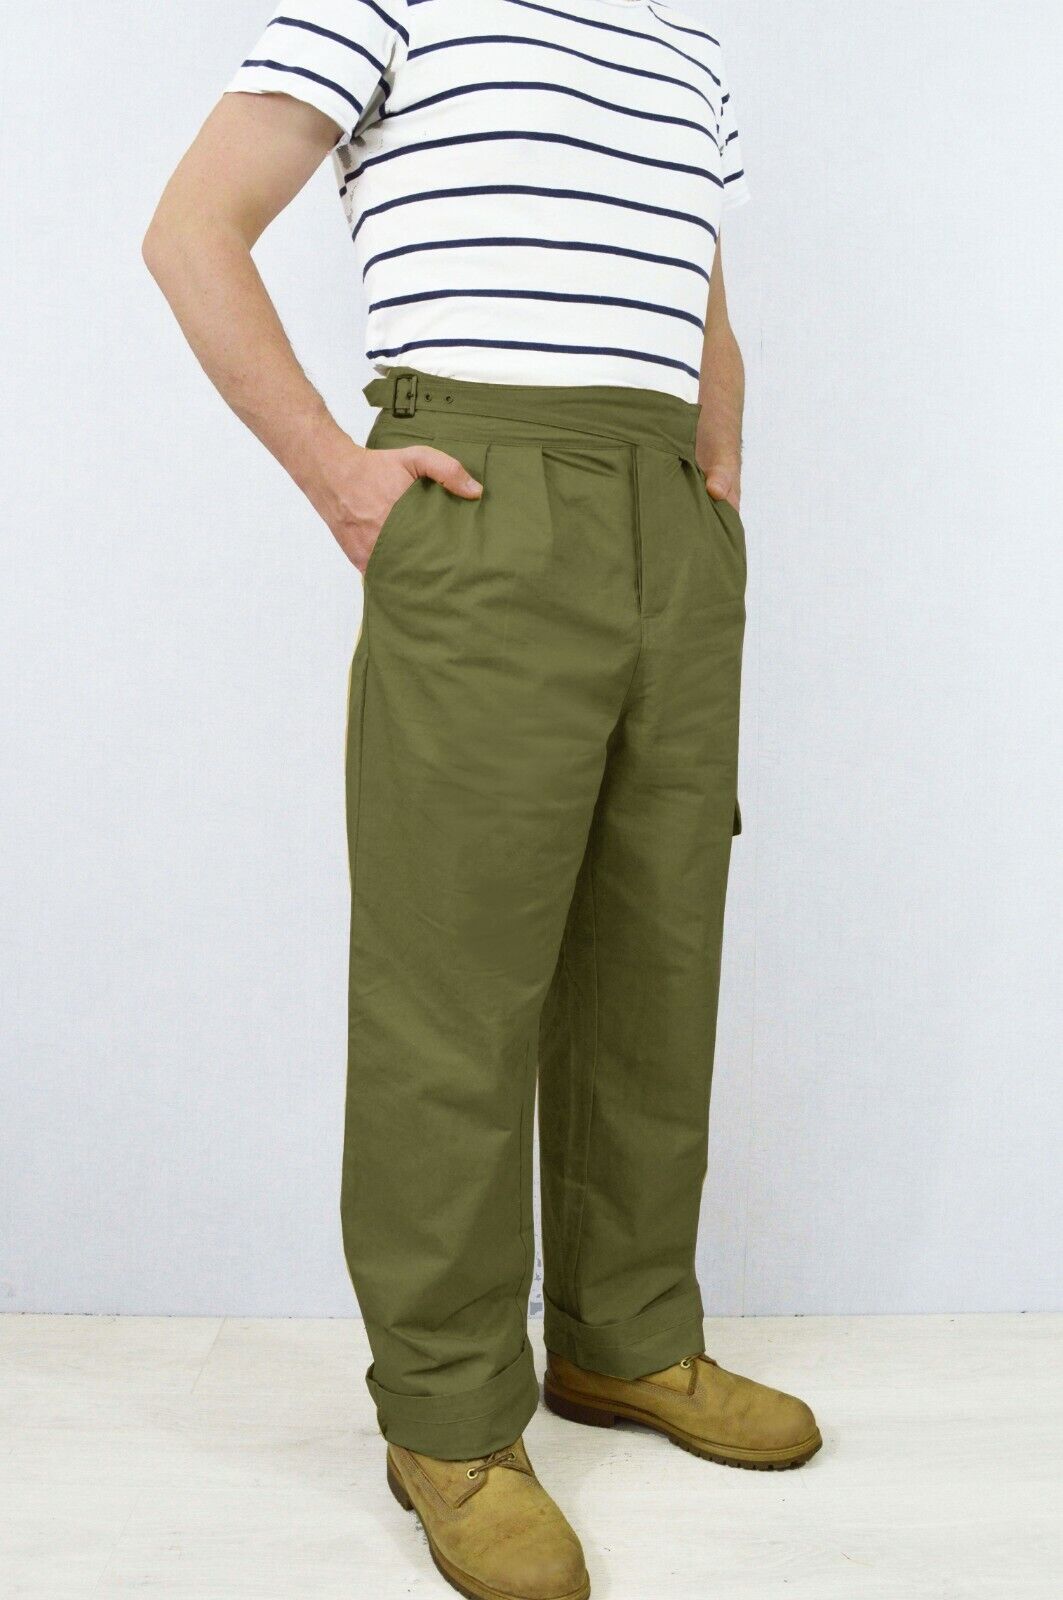 Men's Green Gurkha Pants British Military 1950s Army Trousers - Belted -  Cotton